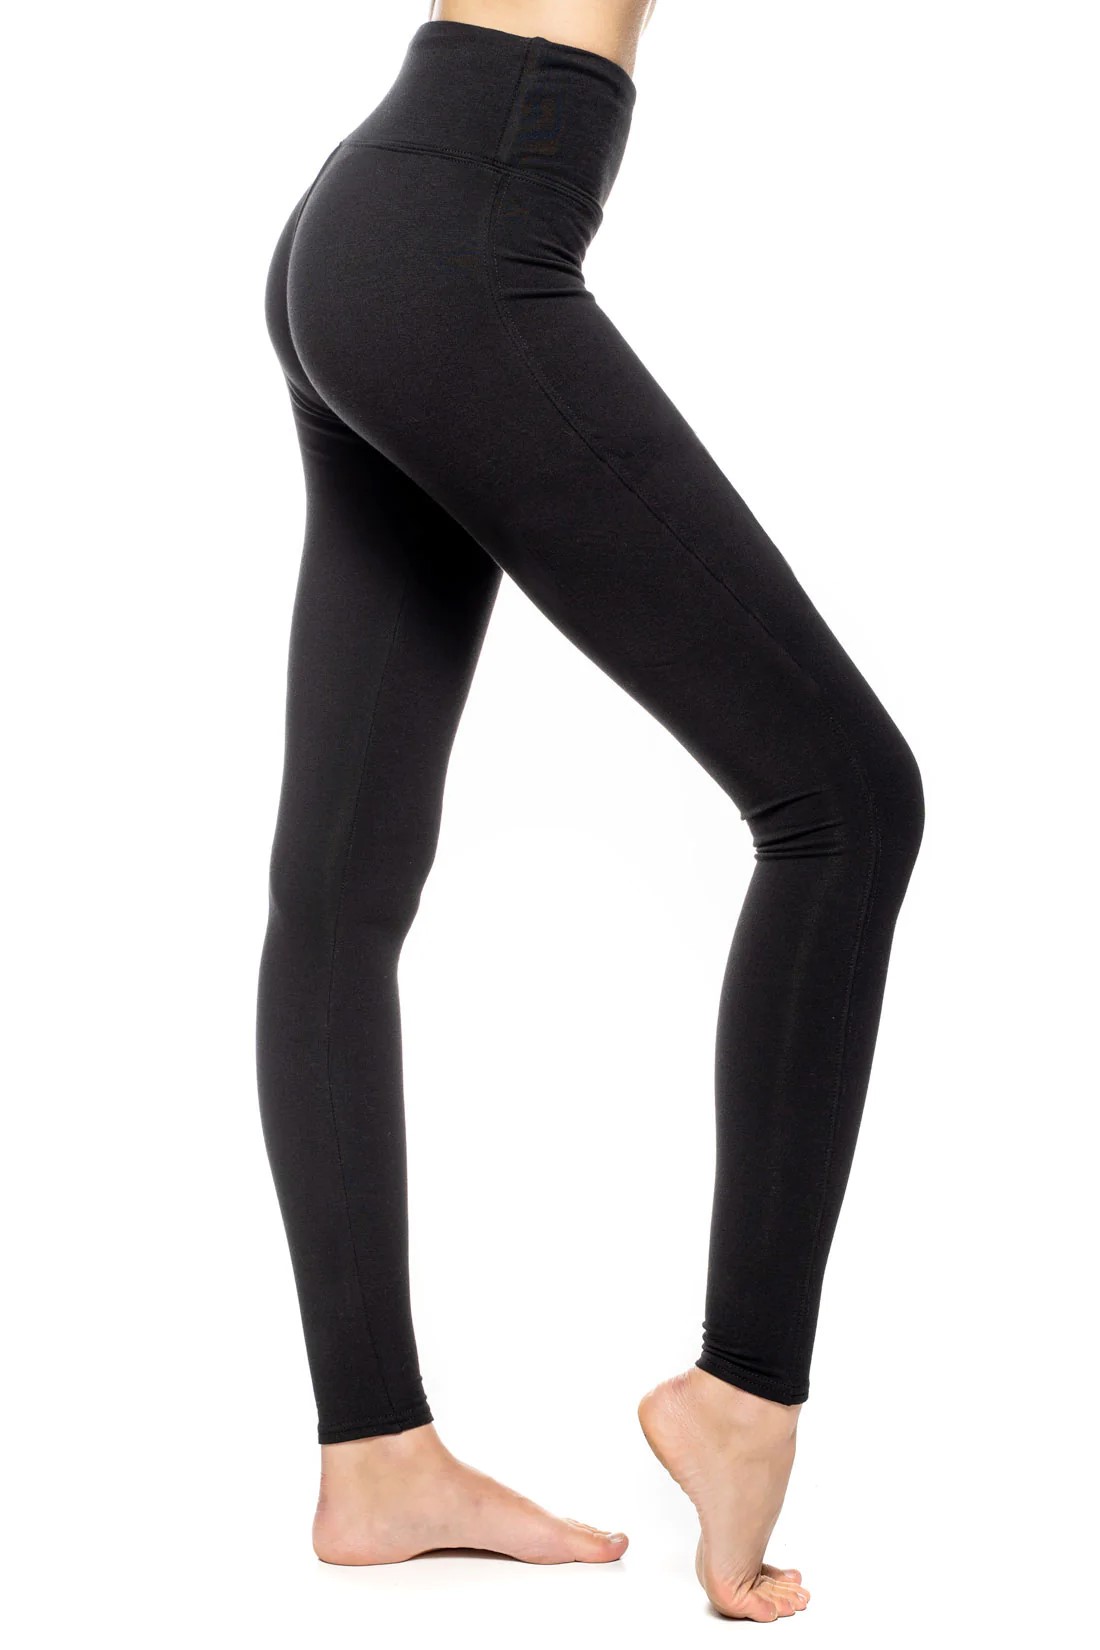 8 Black Leggings to Kickstart Your New Year's Resolutions - Vancouver  Magazine